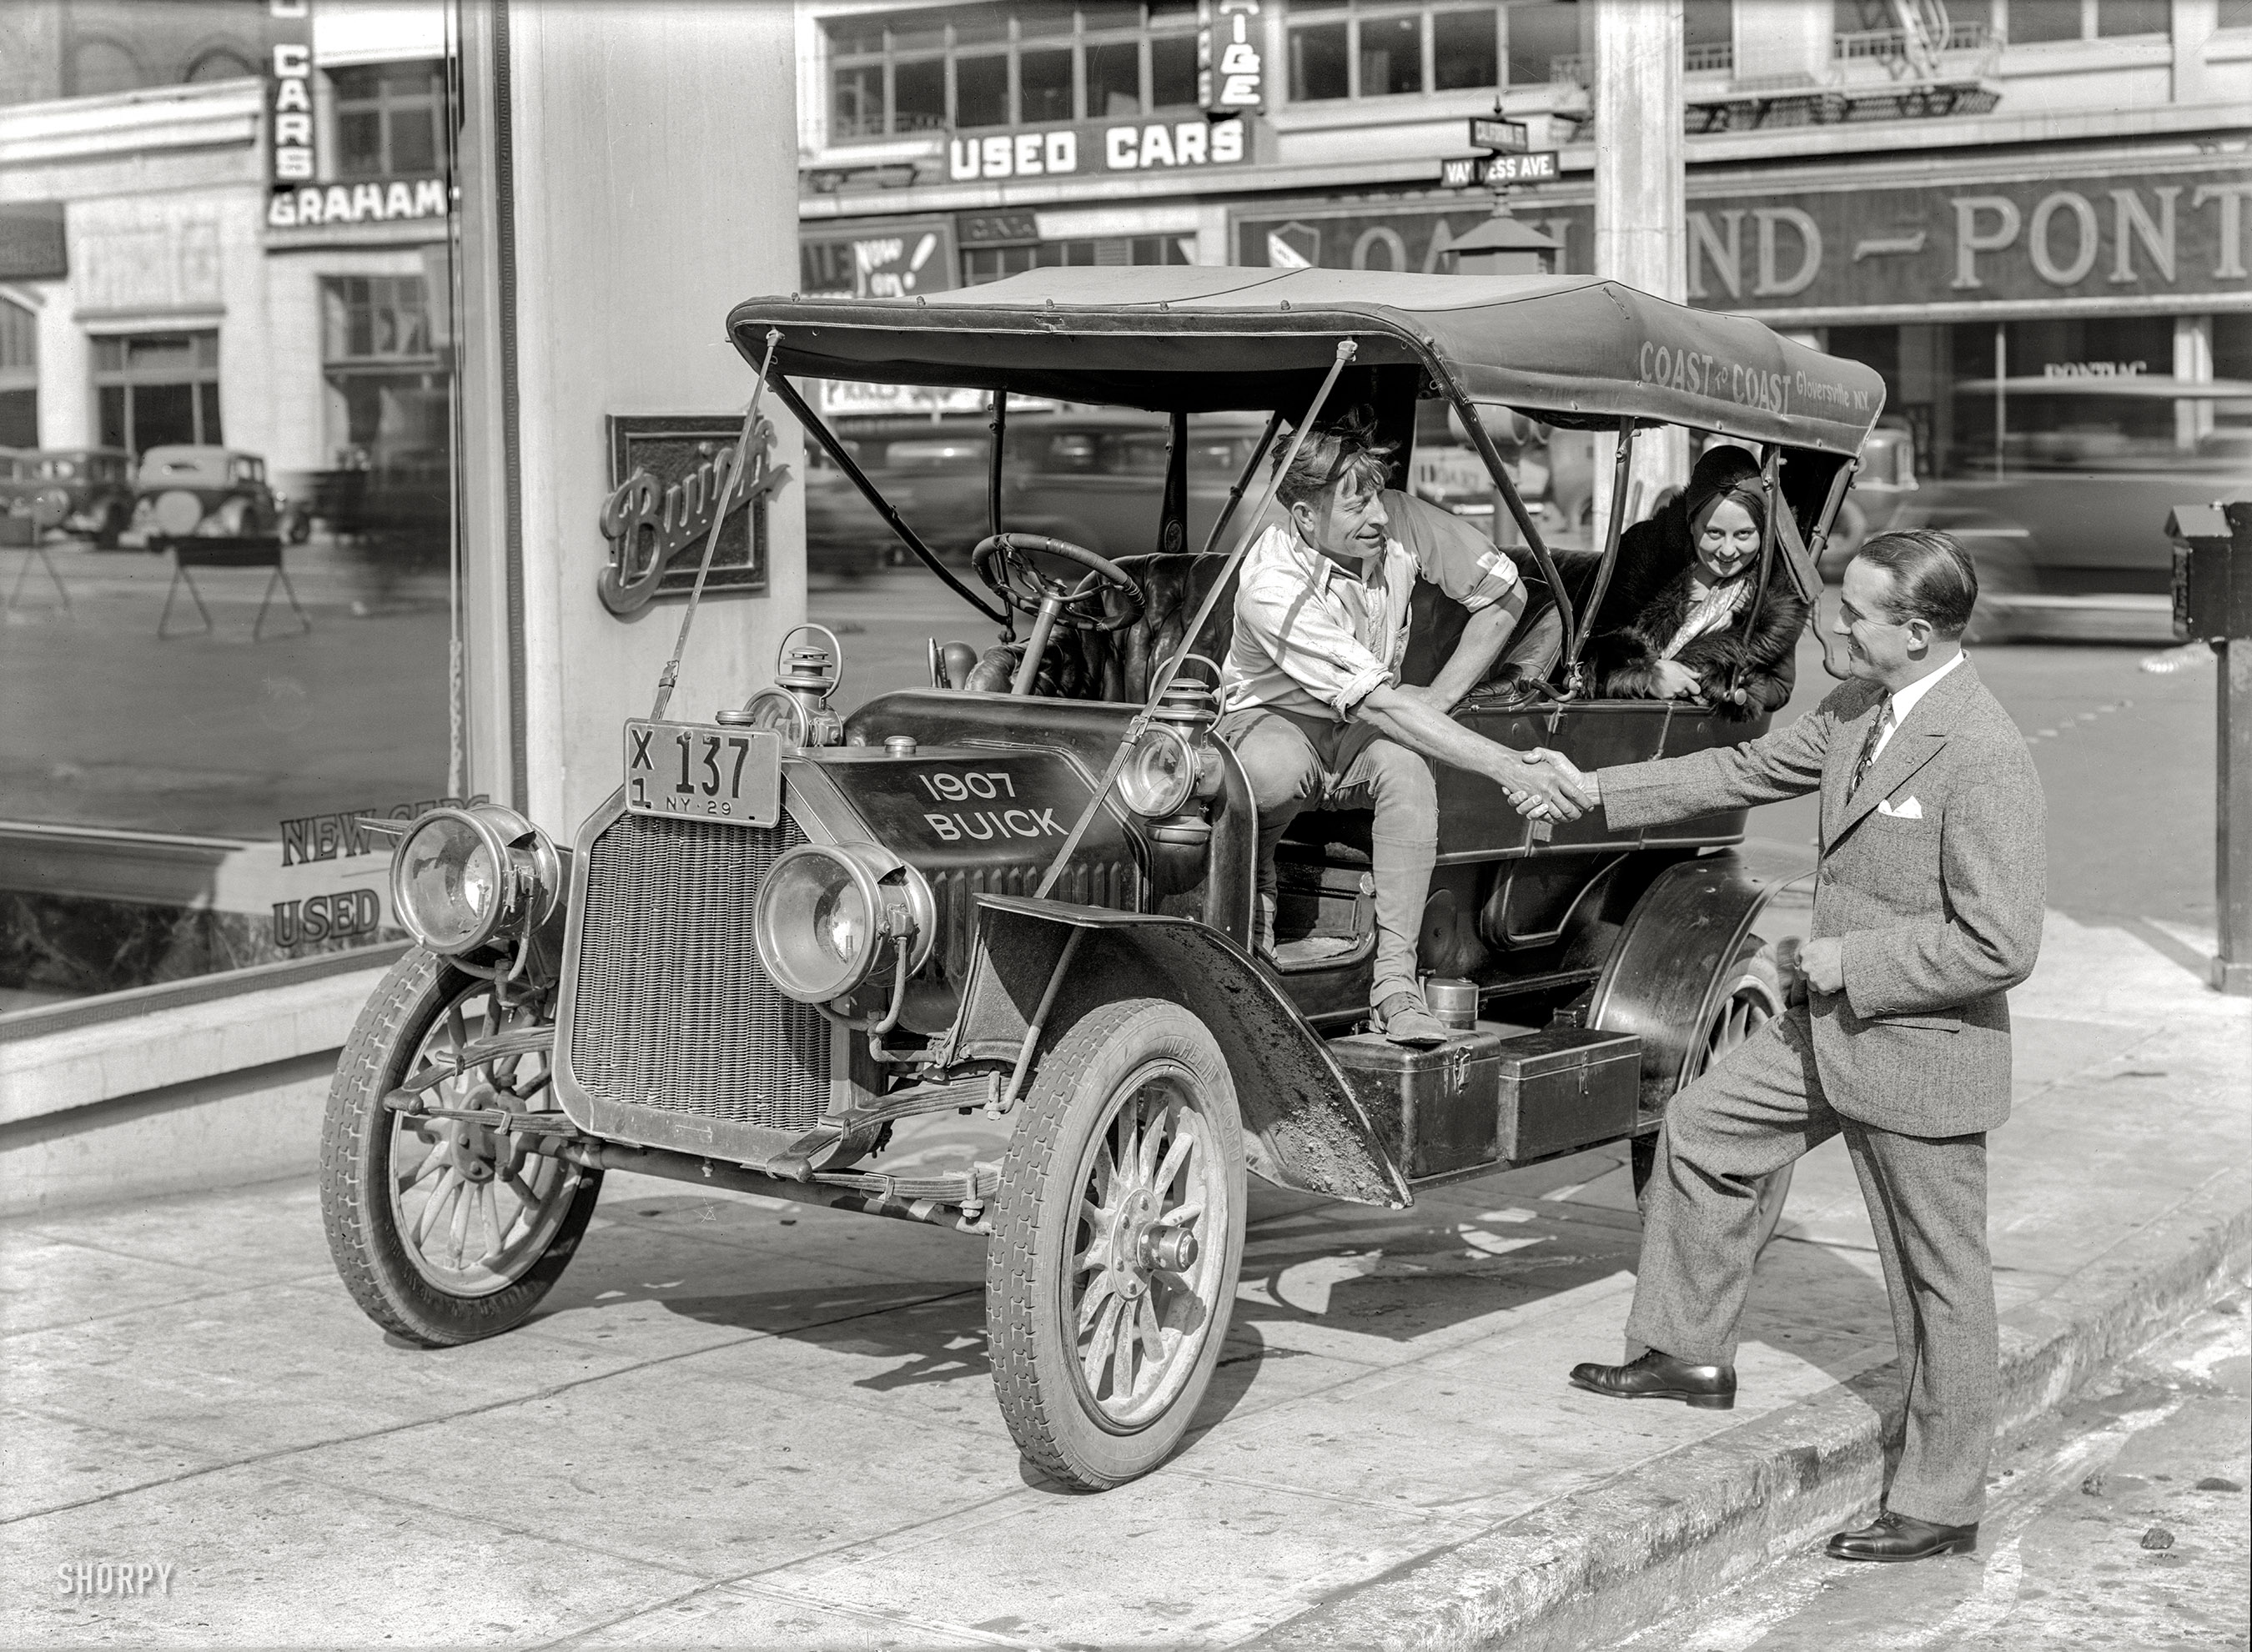 A 1907 "Coast-to-Coast" Buick on San Francisco's Auto Row at Van Ness Avenue and California Street in 1929, evidently at the end of its jaunt. Of all the marques represented here -- Buick, Graham-Paige, Pontiac and Oakland -- only Buick survives. 5x7 inch glass negative by Christopher Helin. View full size.